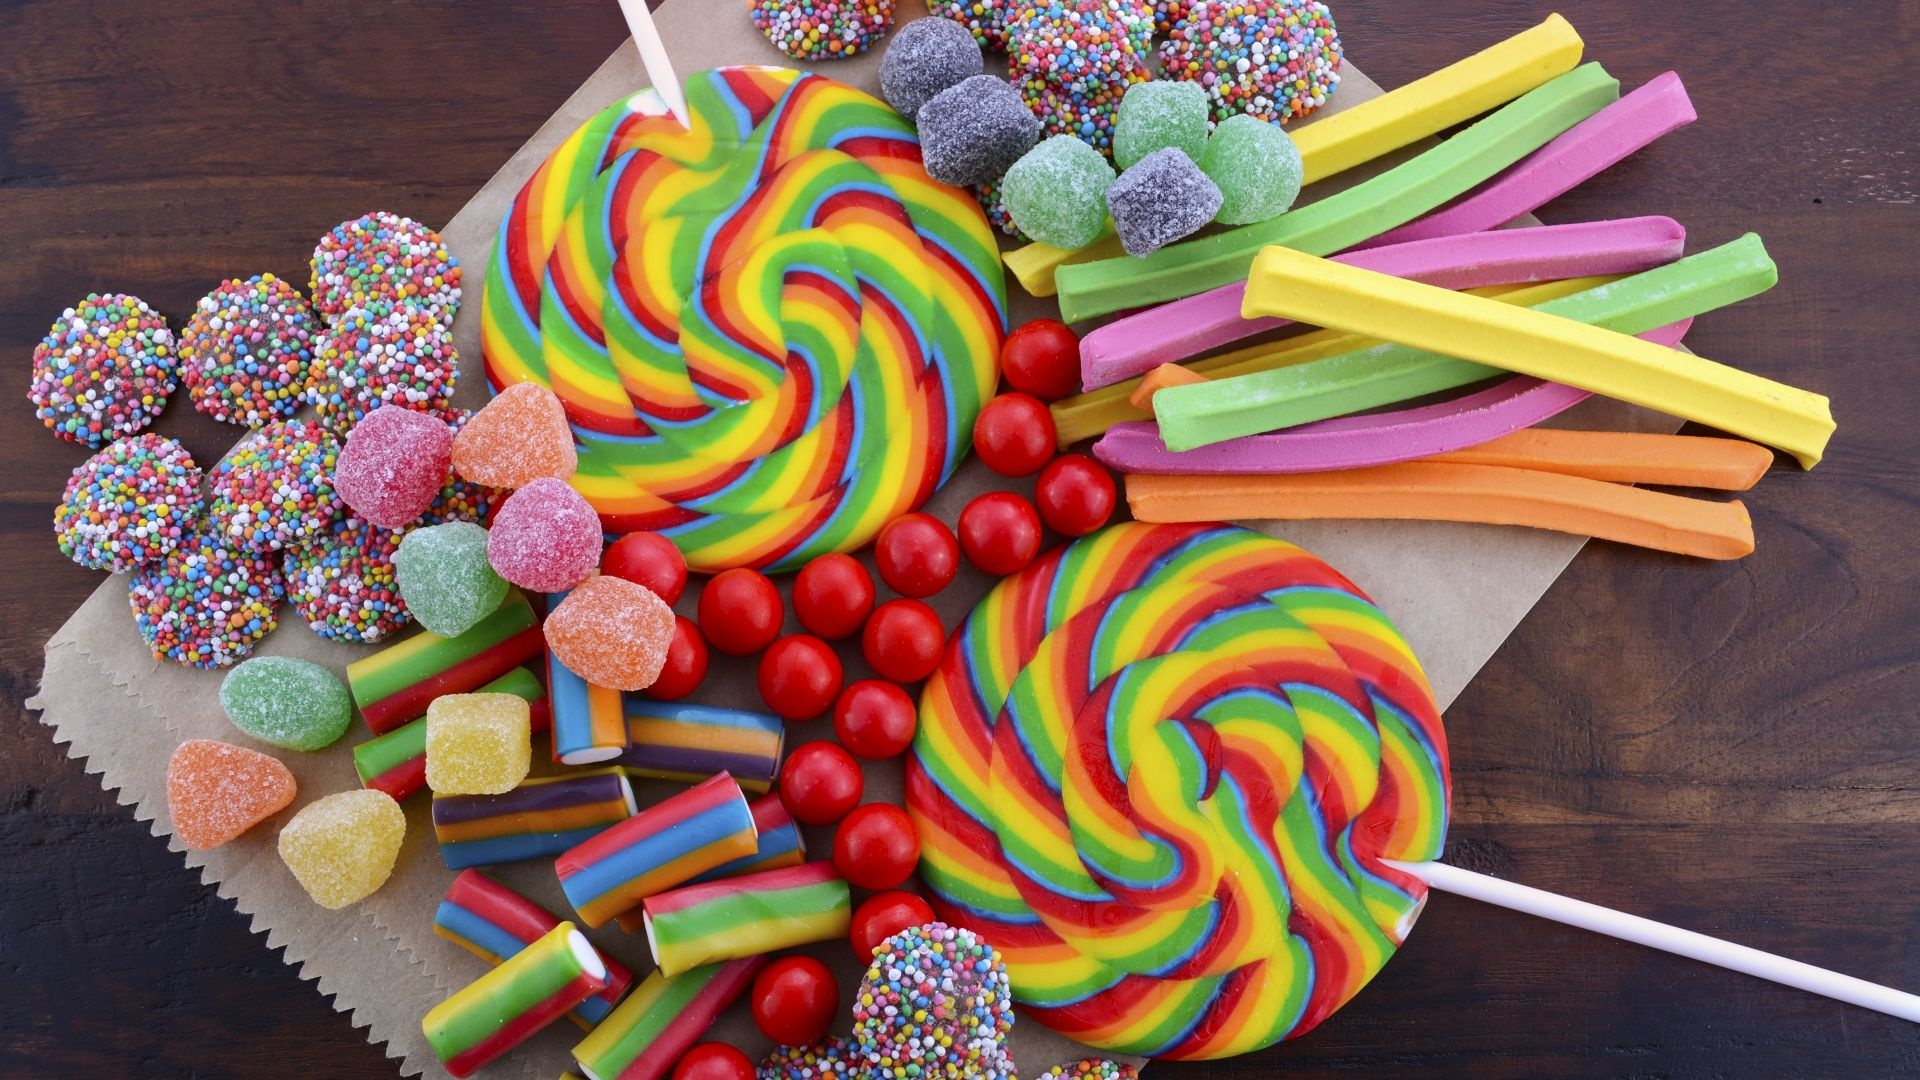 Colorful candies and sweets, Vibrant and enticing, Sweet and sugary, Eye-catching delight, 1920x1080 Full HD Desktop